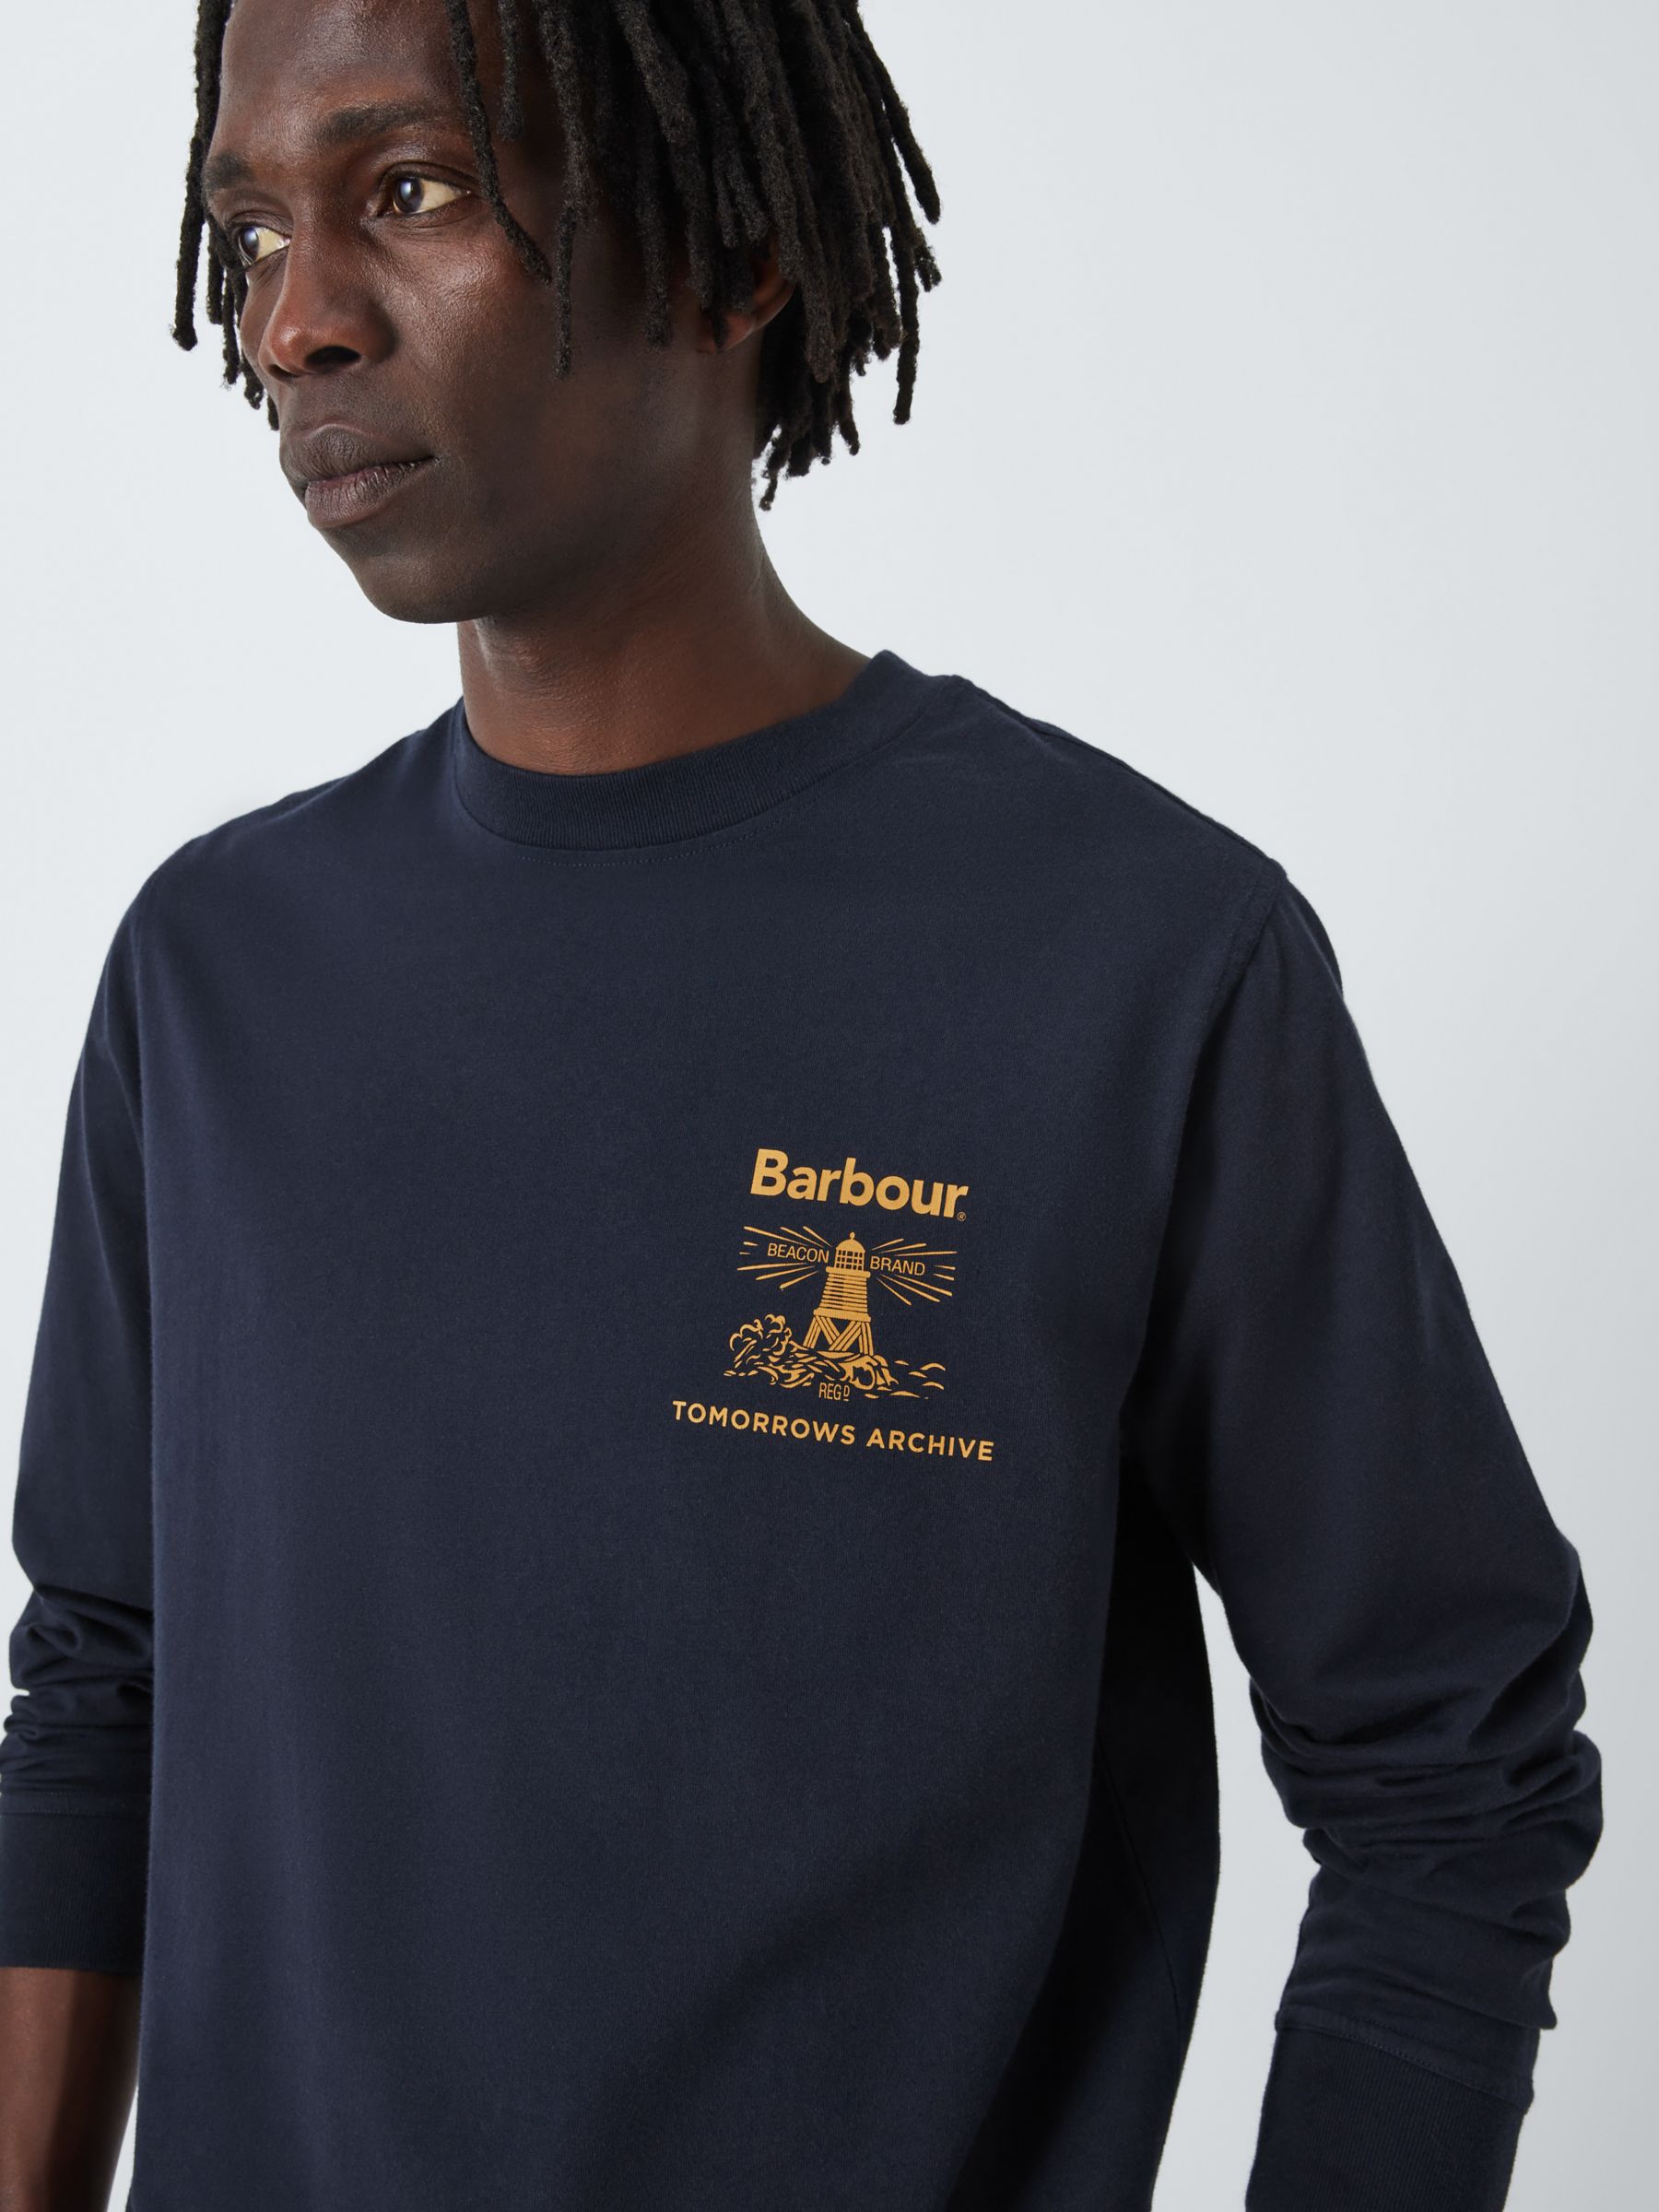 Barbour Tomorrow's Archive Arbour Long Sleeve T-Shirt, Navy, M